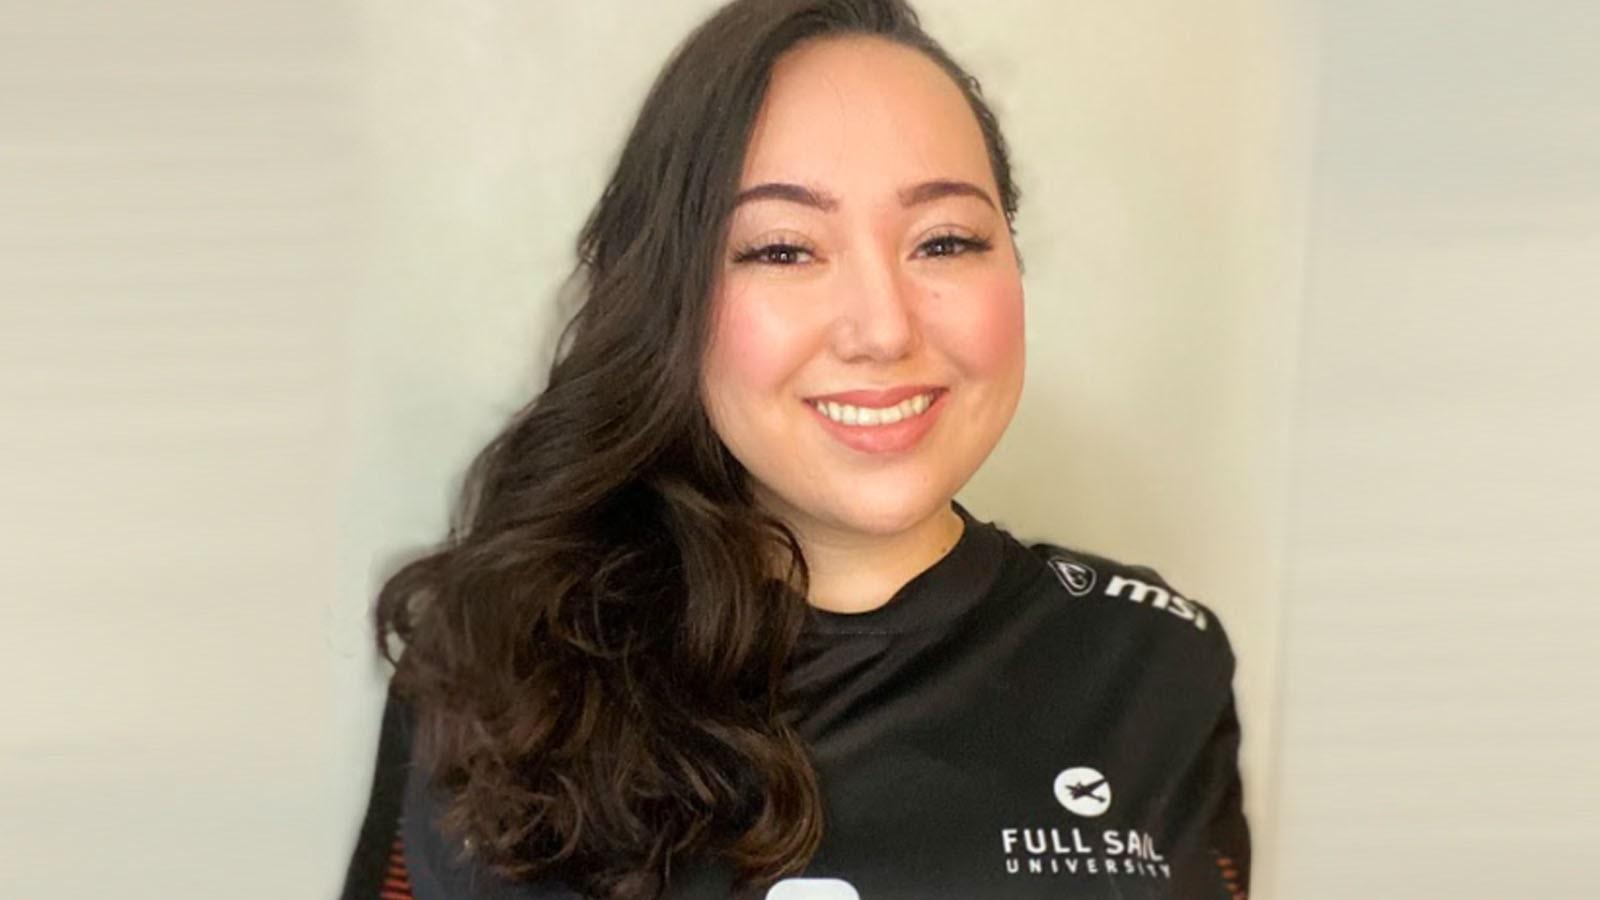 Grad Inetta Bennett, a woman with a big smile and long wavy brown hair to one side, wearing a Full Sail Armada branded esports jersey against a beige backdrop.